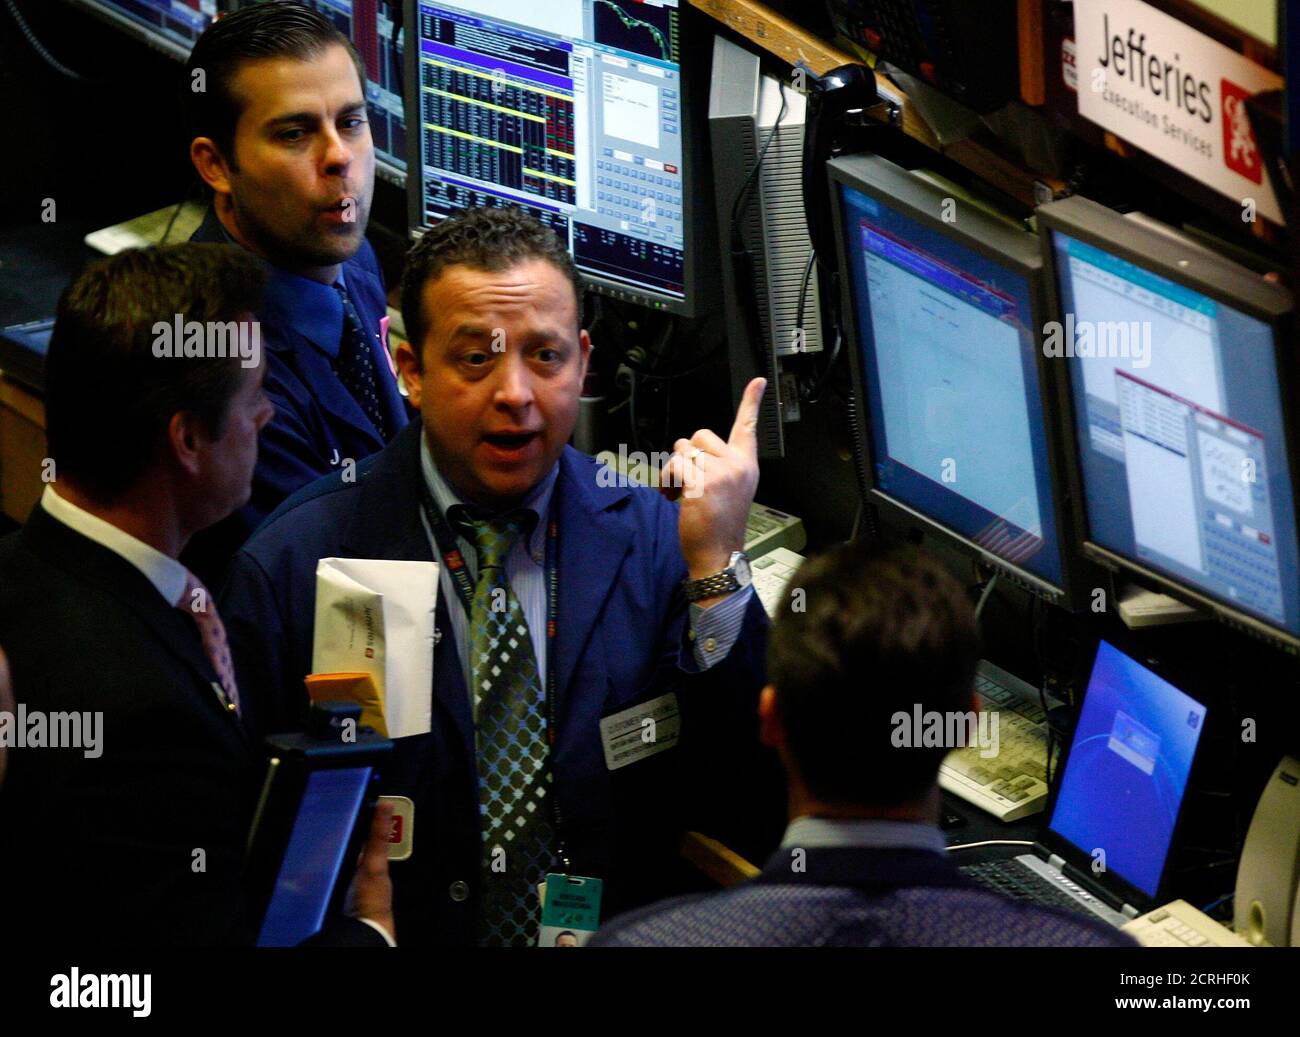 Traders work on the floor of the New York Stock Exchange, October 23, 2008. Wall Street extended gains on Thursday, with the Dow briefly jumping 3 percent, as beaten-down energy shares benefited from a gain in oil prices.     REUTERS/Brendan McDermid (UNITED STATES) Stock Photo